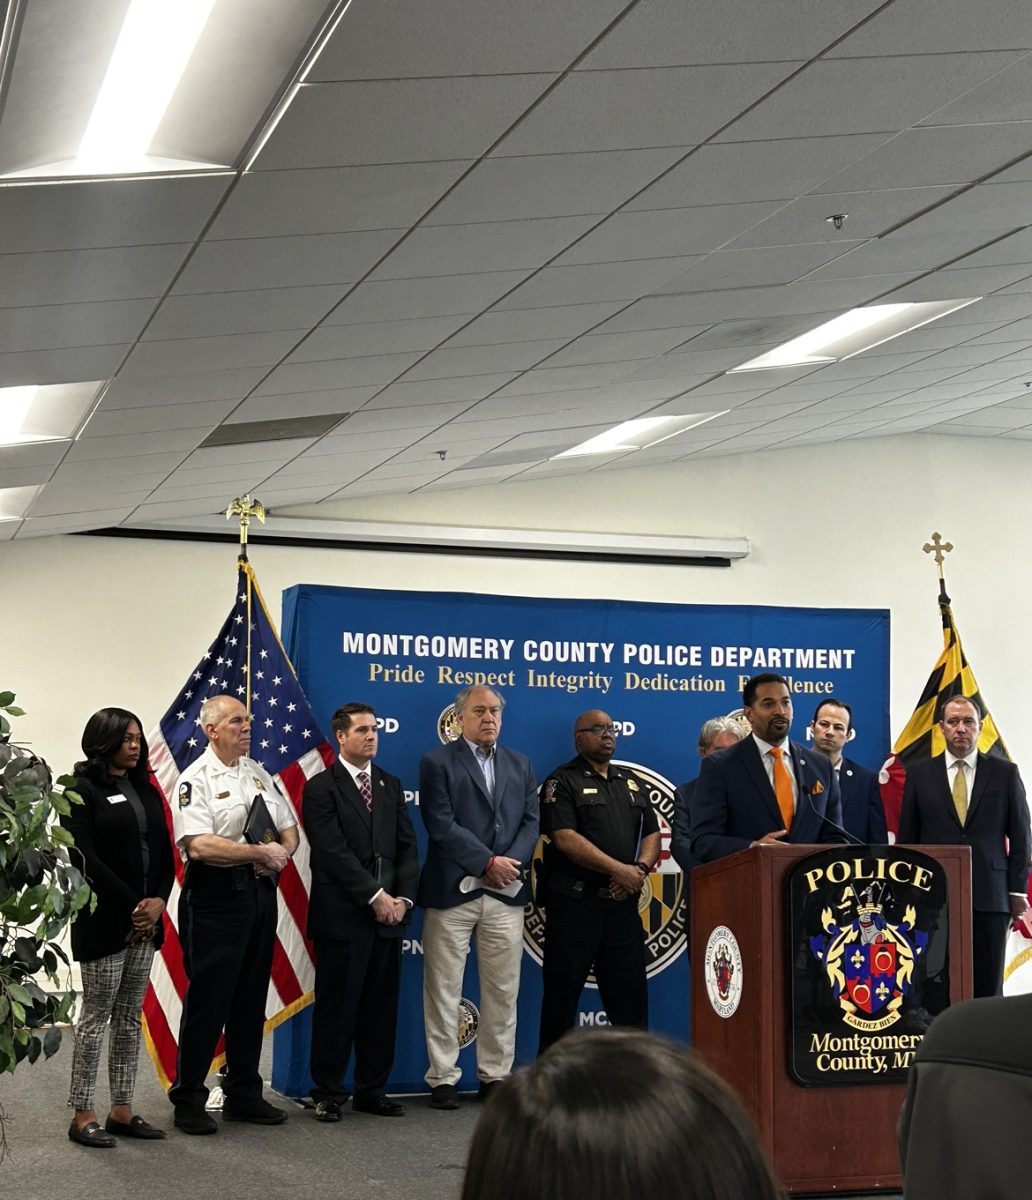 MCPS officials speak at a press conference at the Montgomery County Police Department First District on Apr. 19 regarding the arrest of former student Alex Ye.